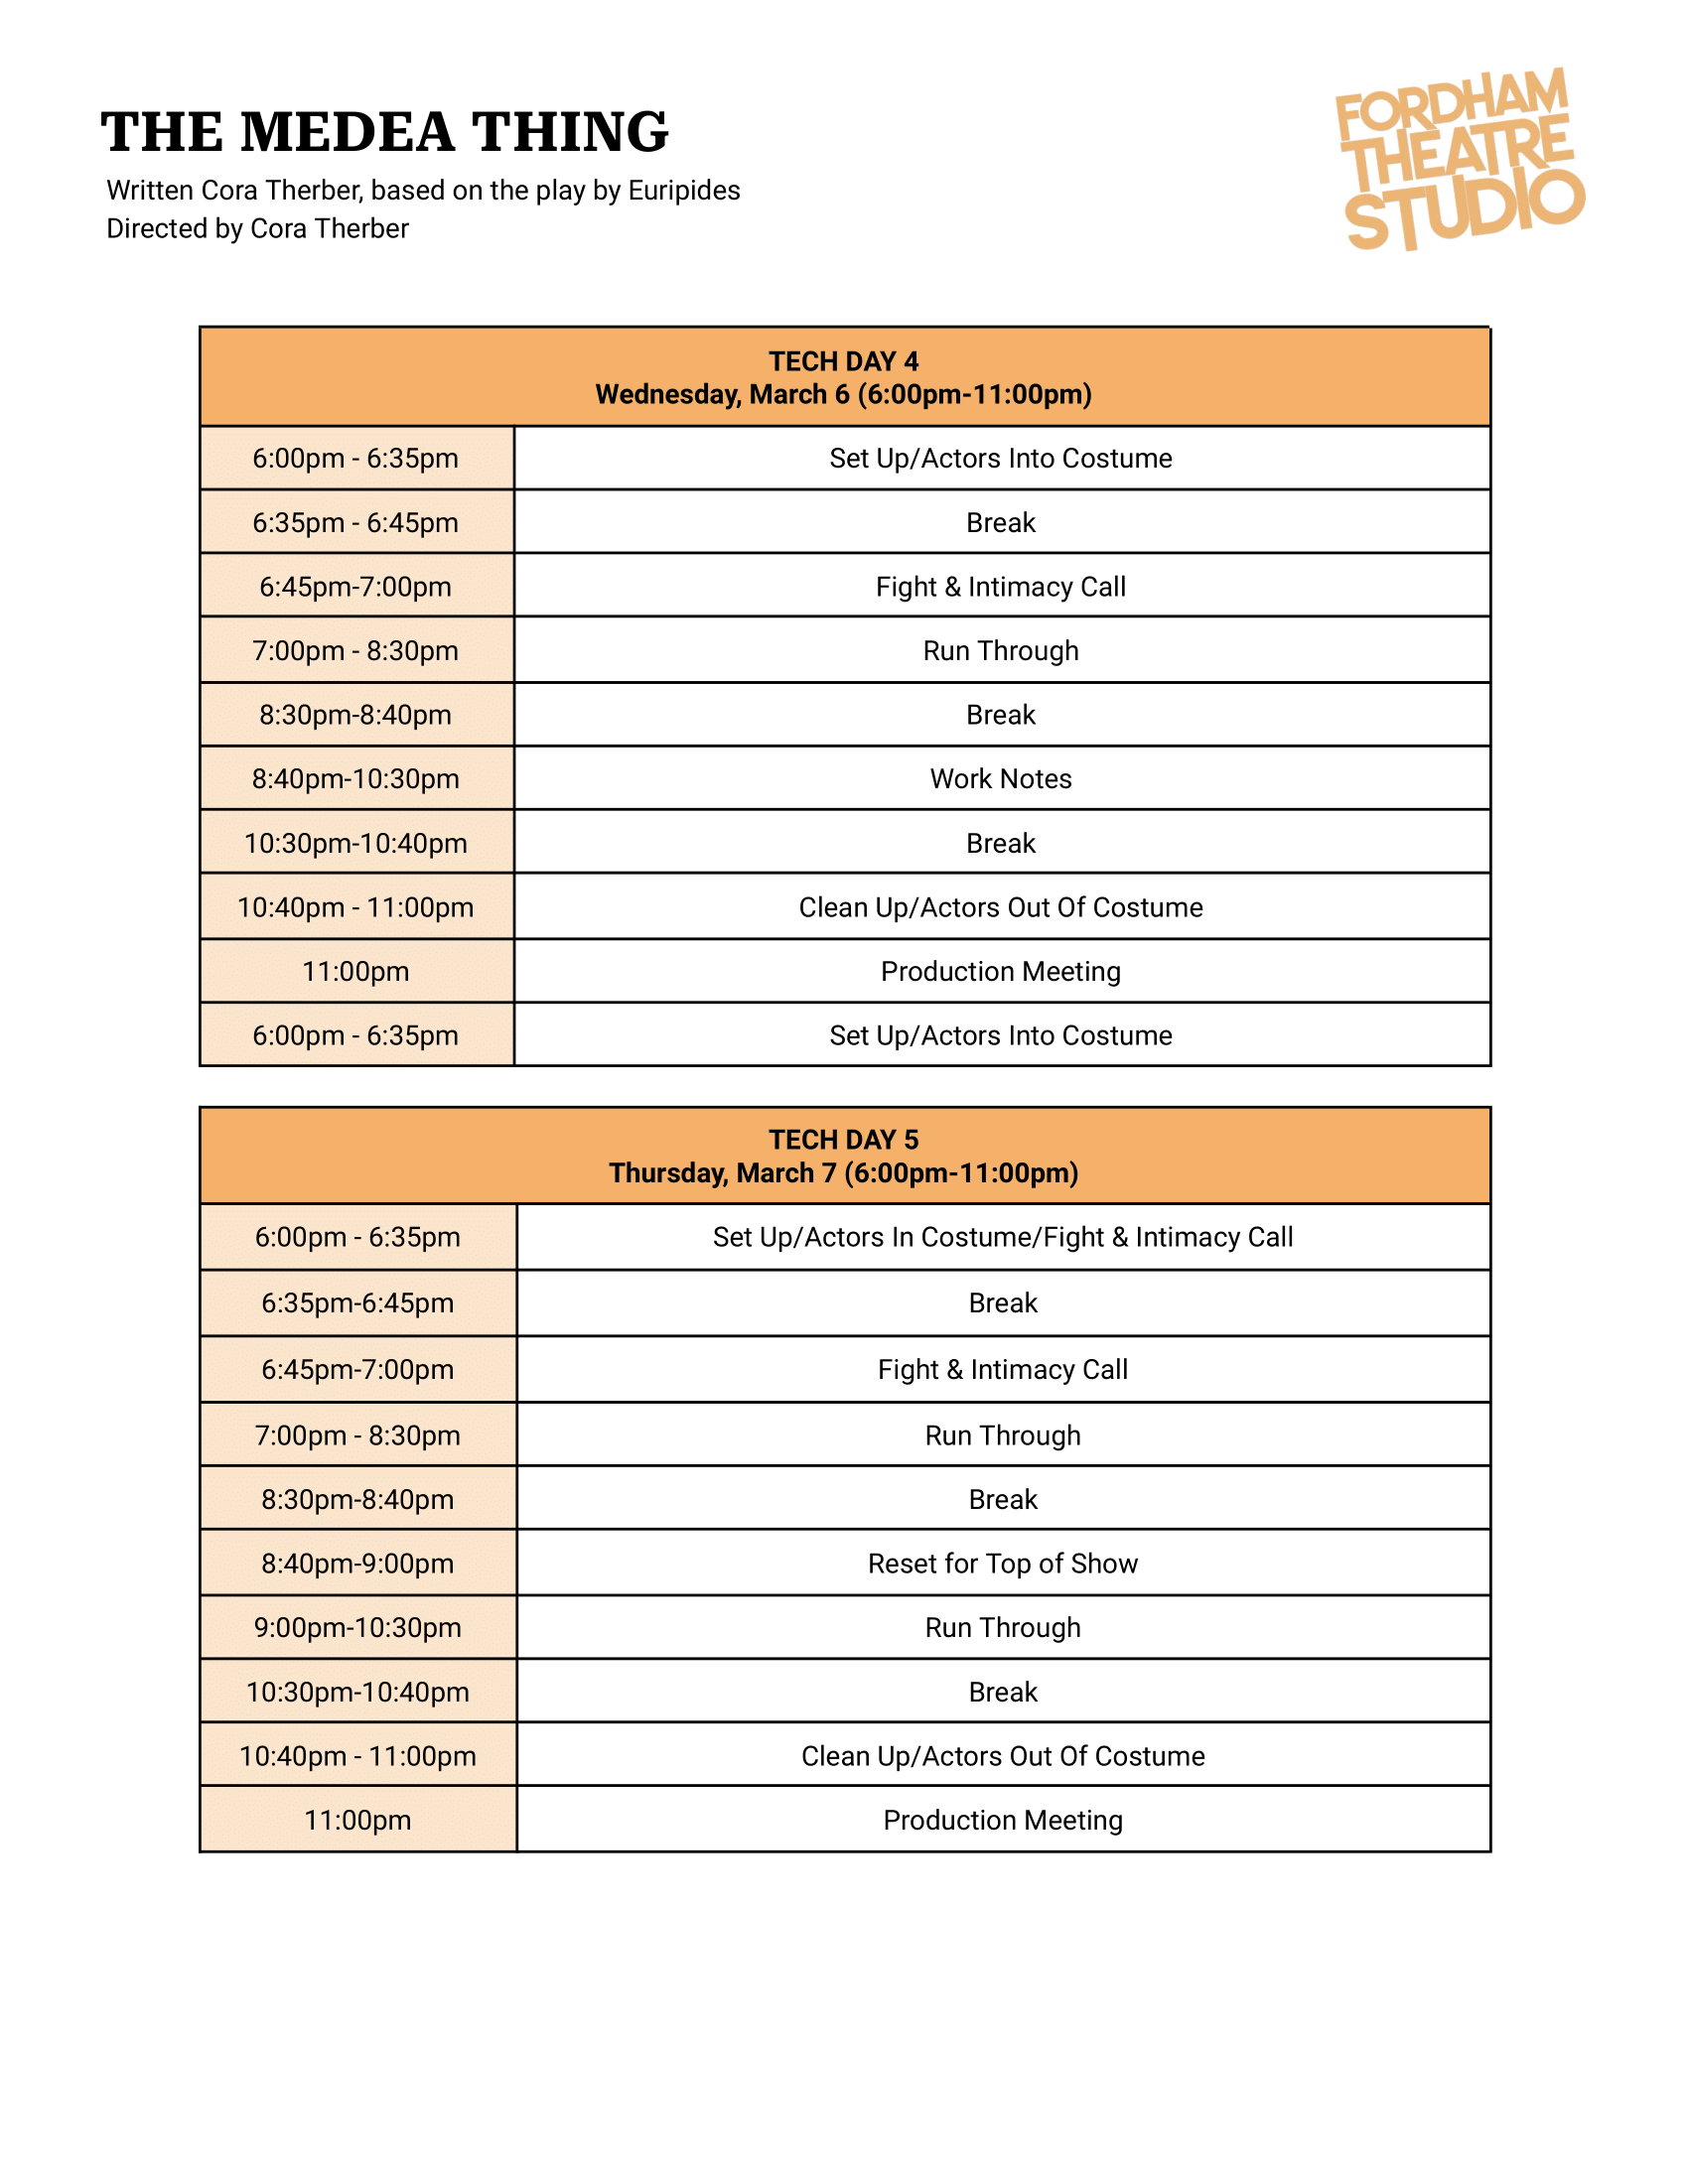 The Medea Thing _ Updated Tech Schedule  (1)-3.png